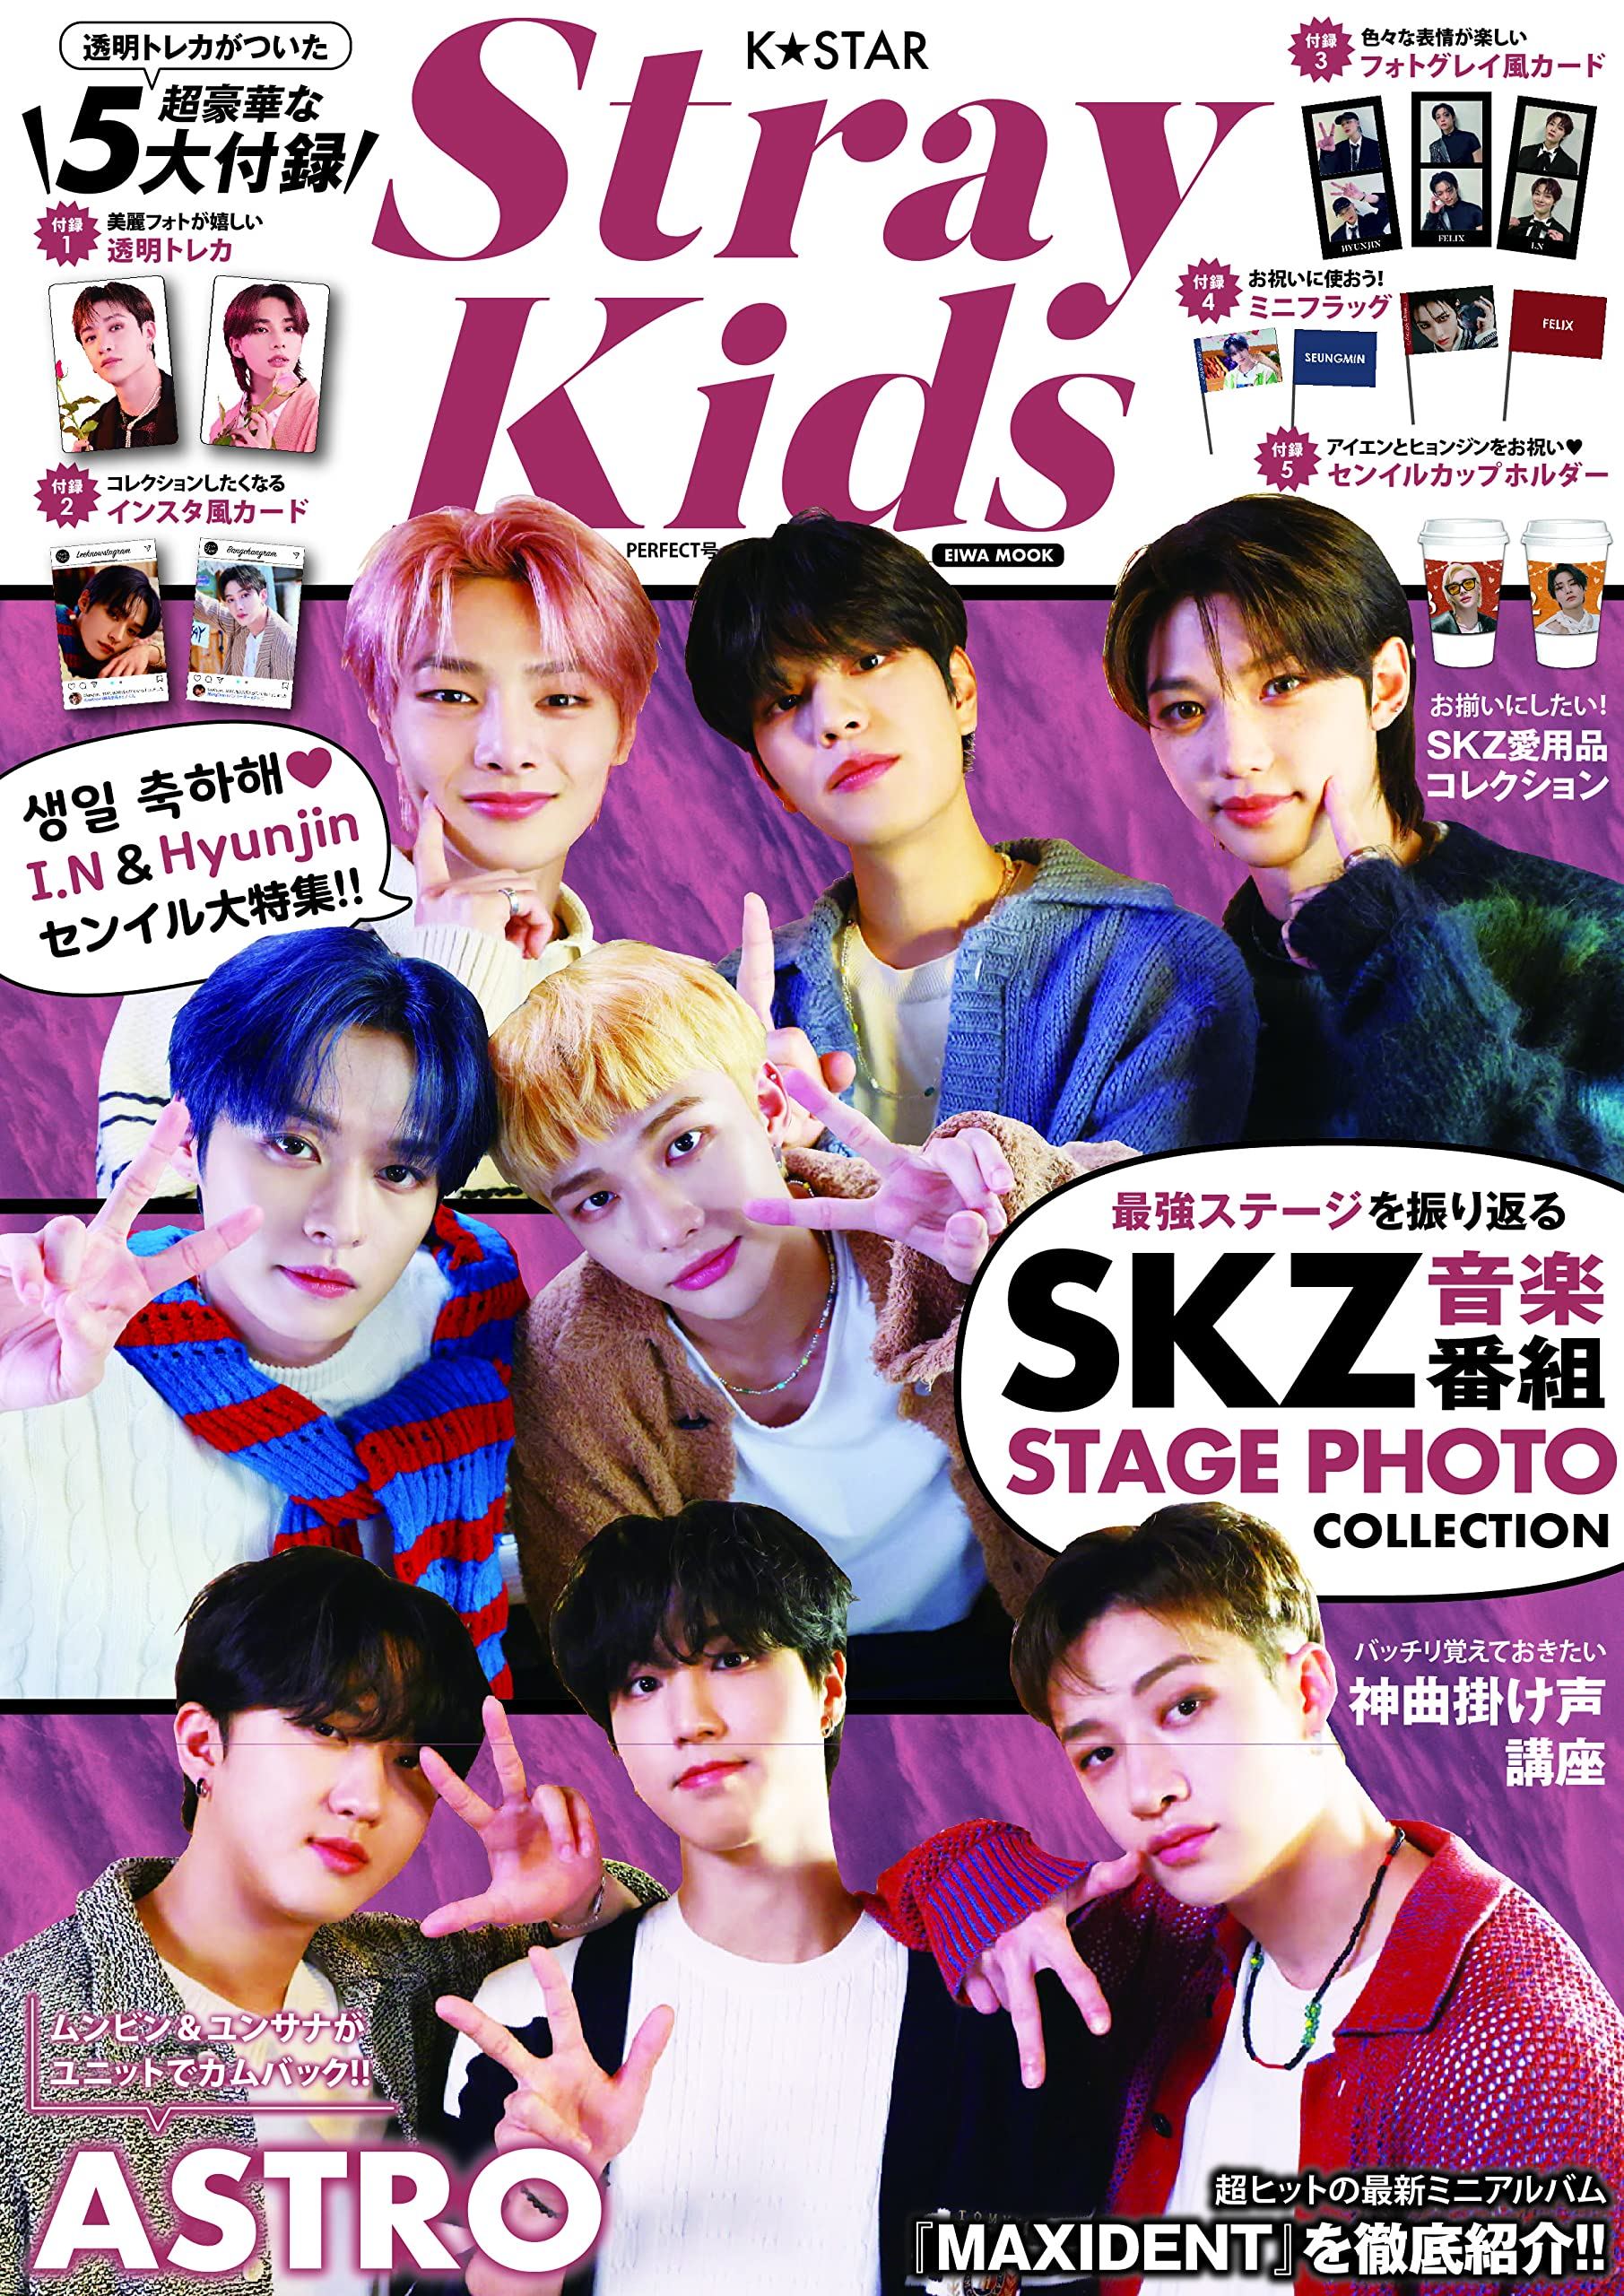 K Star Stray Kids Perfect Issue